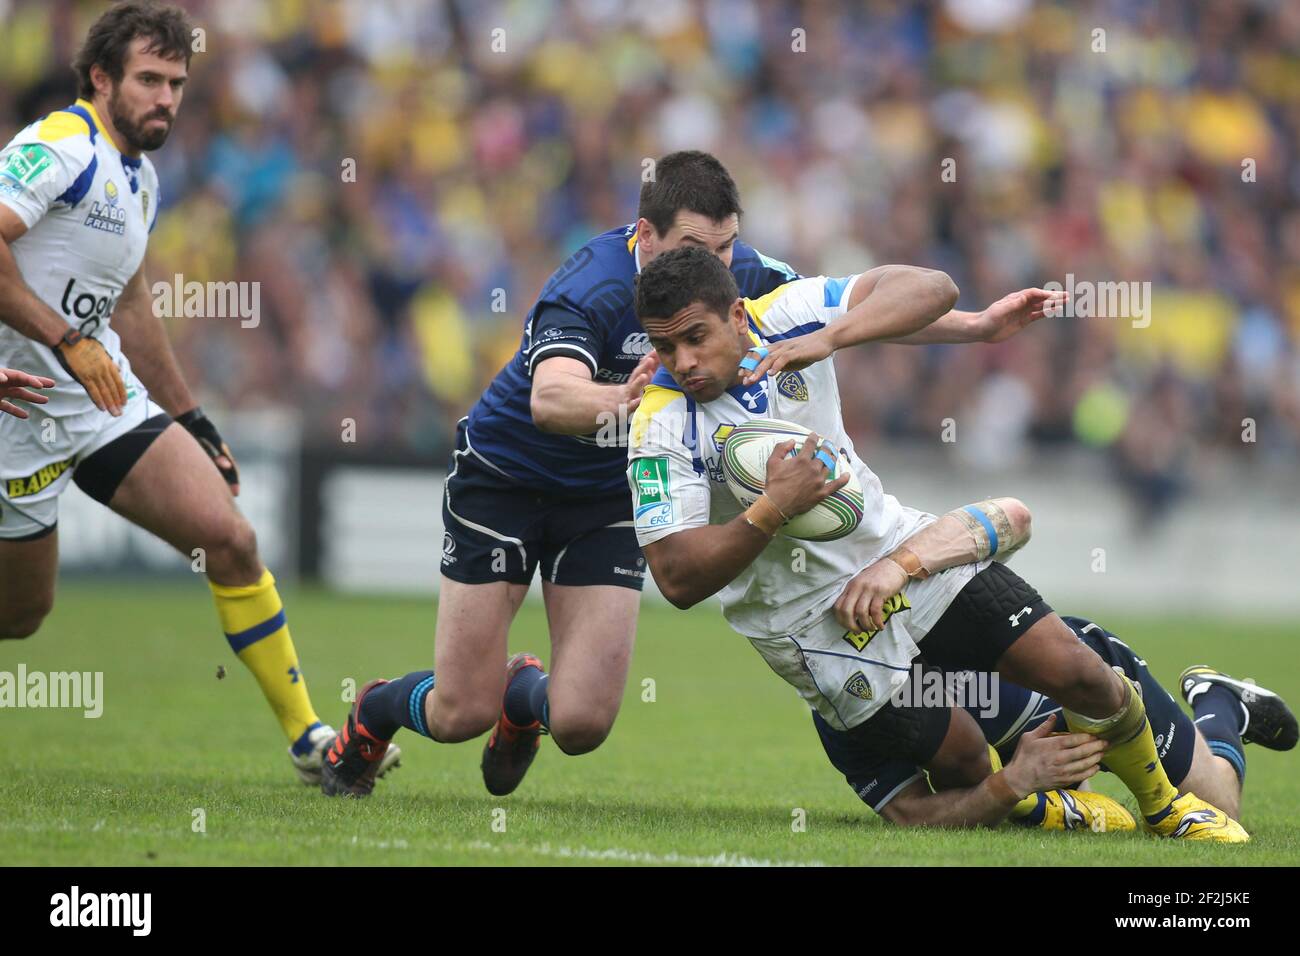 RUGBY - COUPE HEINEKEN 2011/2012 - 1/2 FINAL - ASM CLERMONT CONTRE LEINSTER  RUGBY - 29/04/2012 - PHOTO MANUEL BLONDAU / DPPI - WESLEY FOFANA Photo  Stock - Alamy